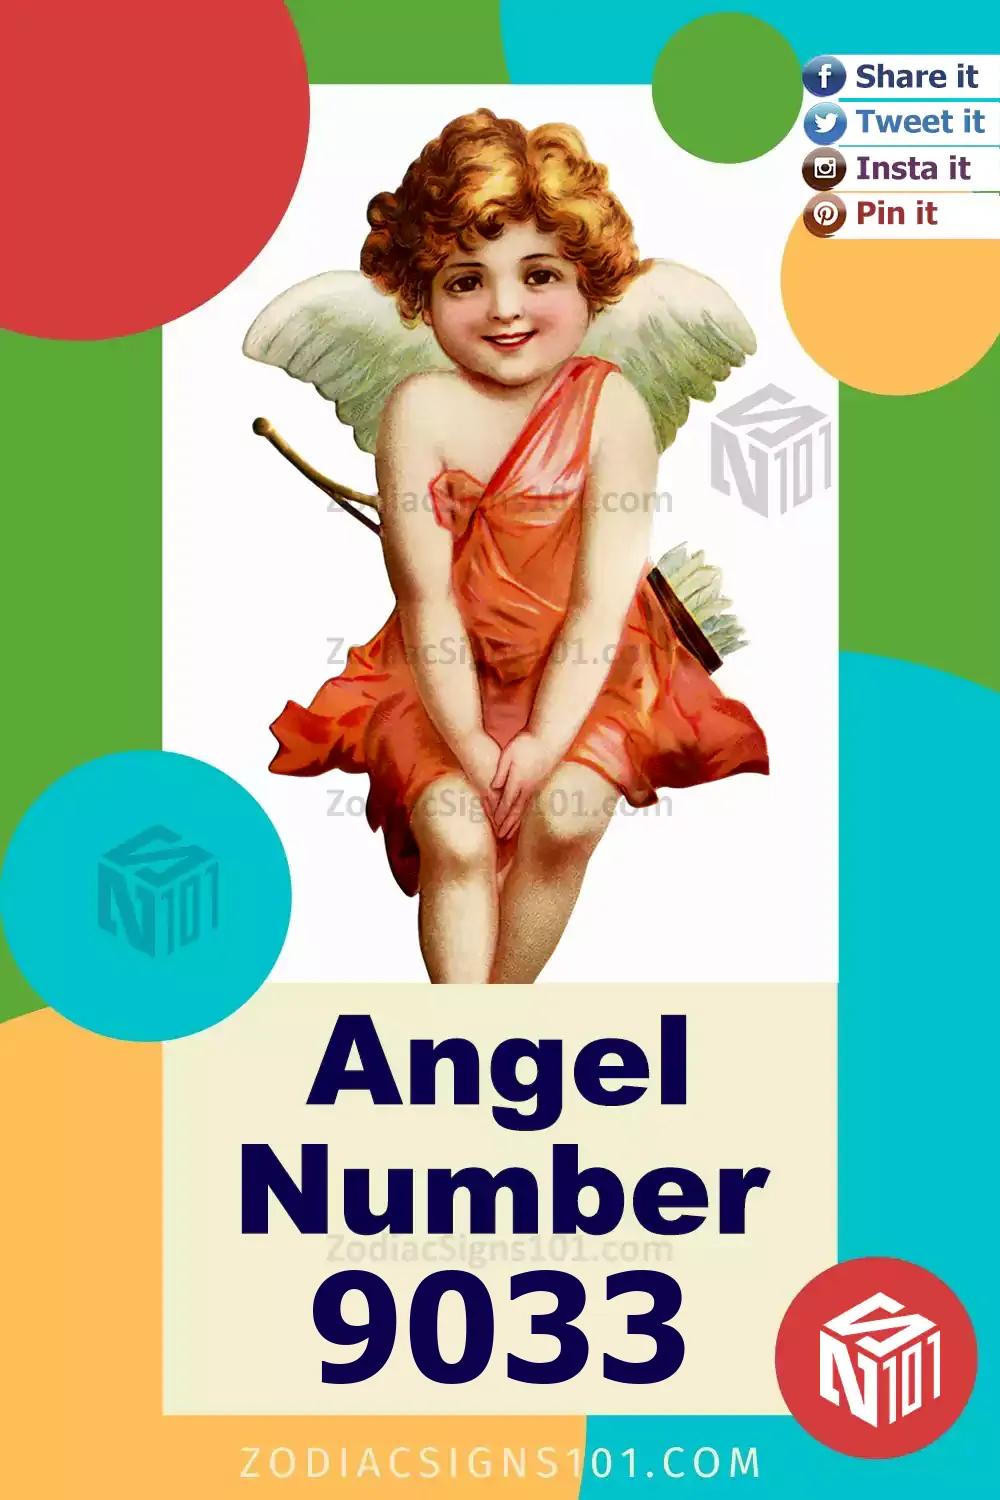 9033 Angel Number Meaning